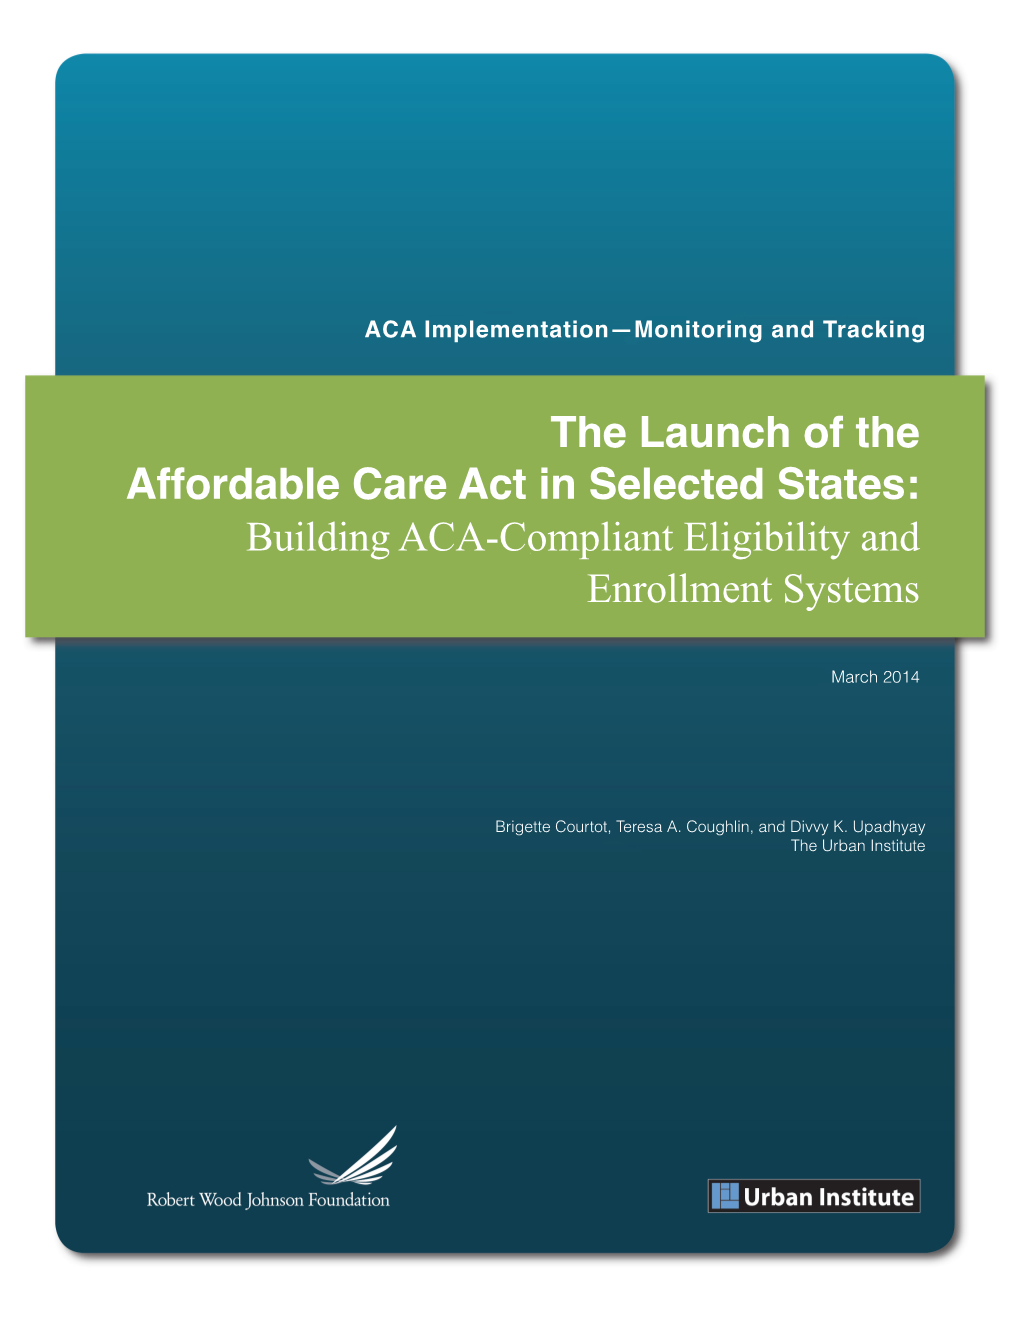 The Launch of the Affordable Care Act in Selected States: Building ACA-Compliant Eligibility and Enrollment Systems